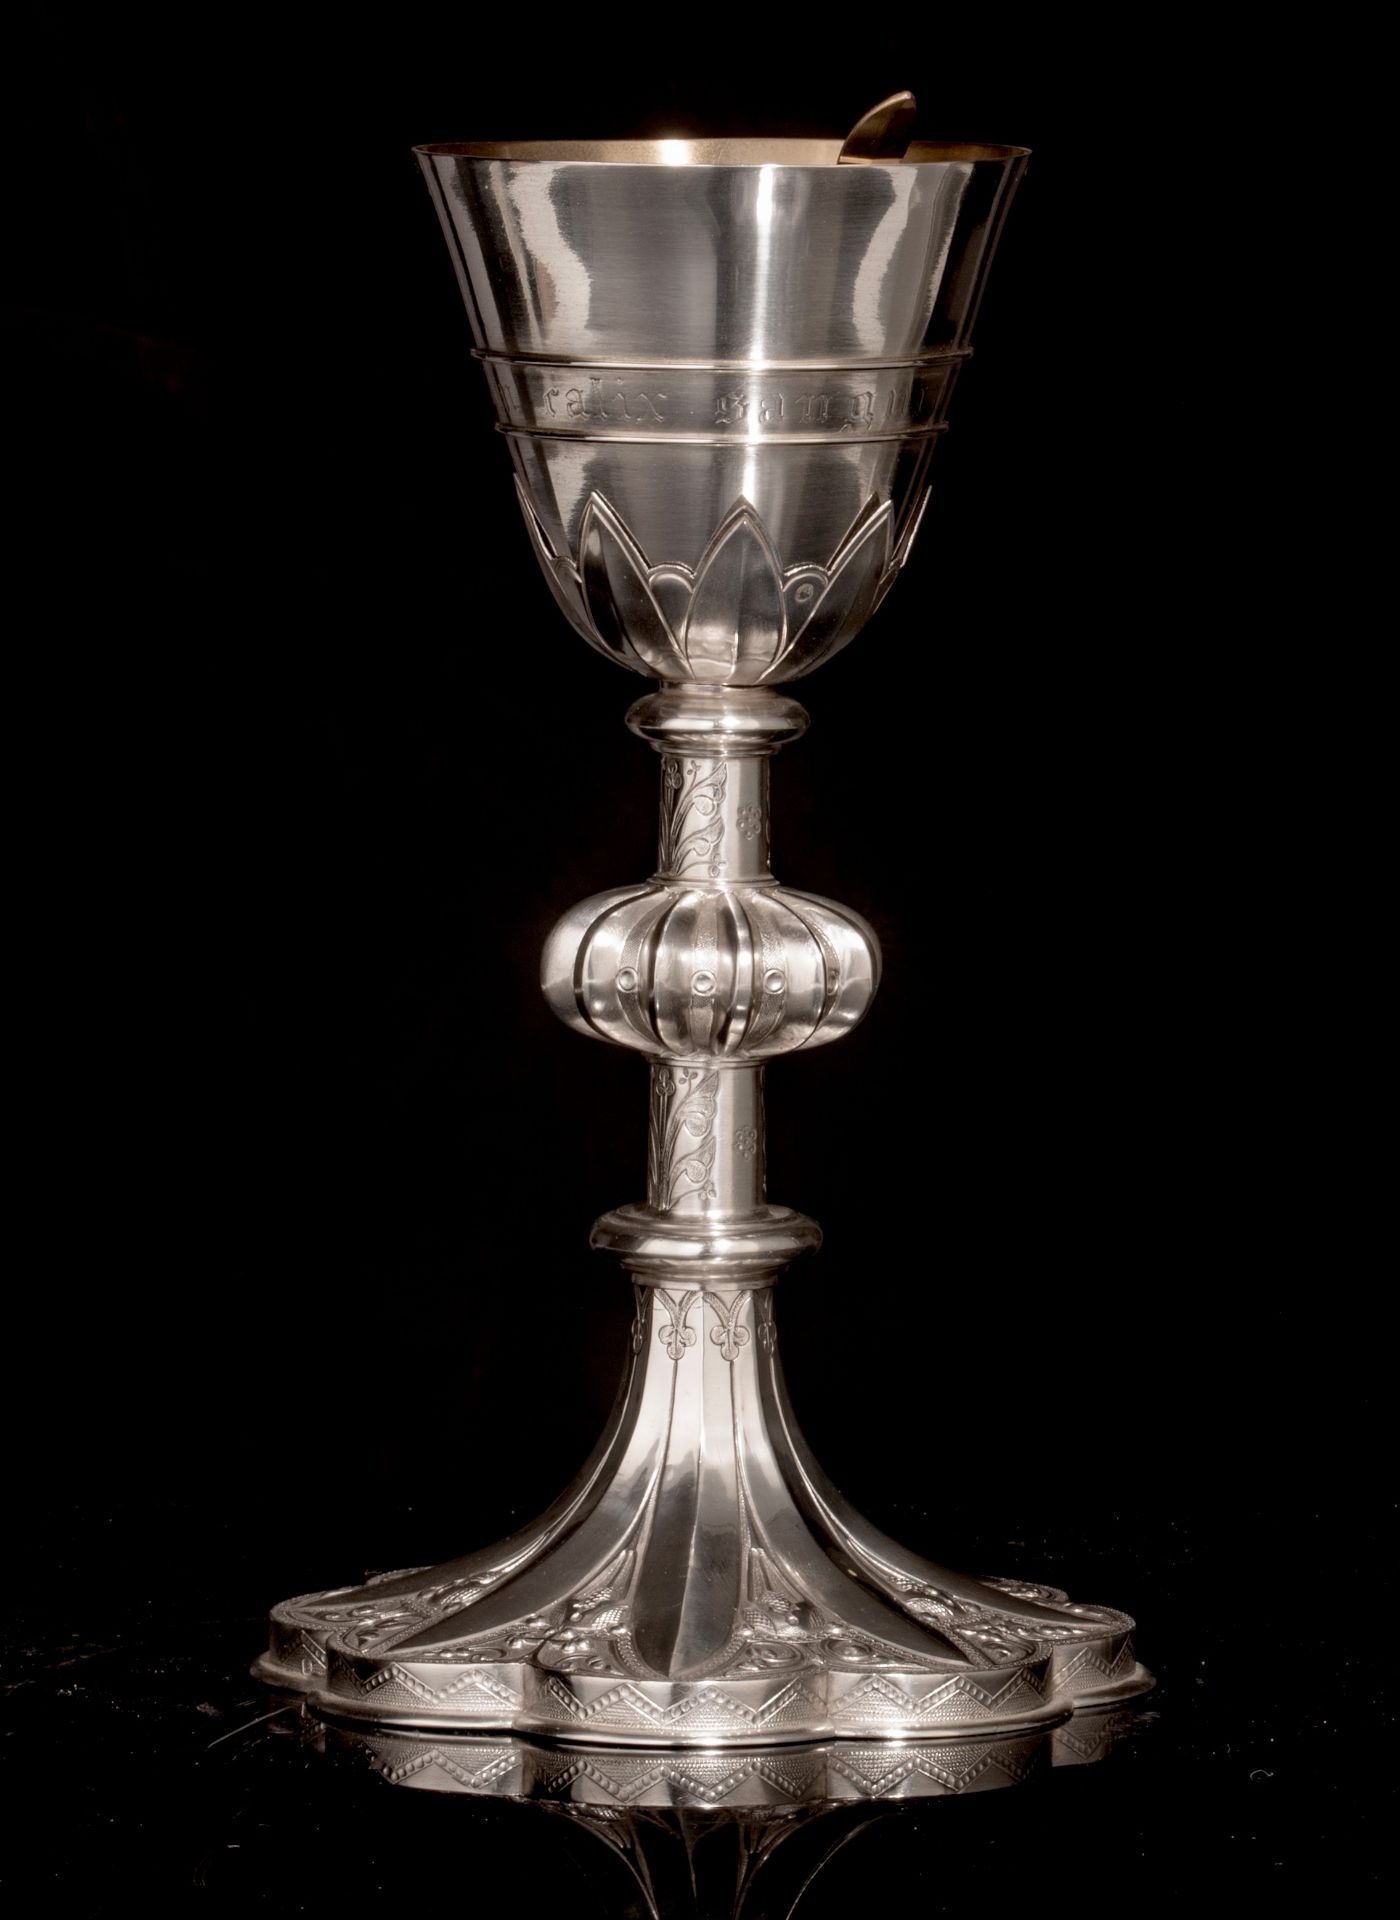 A French silver chalice with floral decoration, hallmarked Paris after 1838, 950/000, H 24,5 cm - to - Image 5 of 11